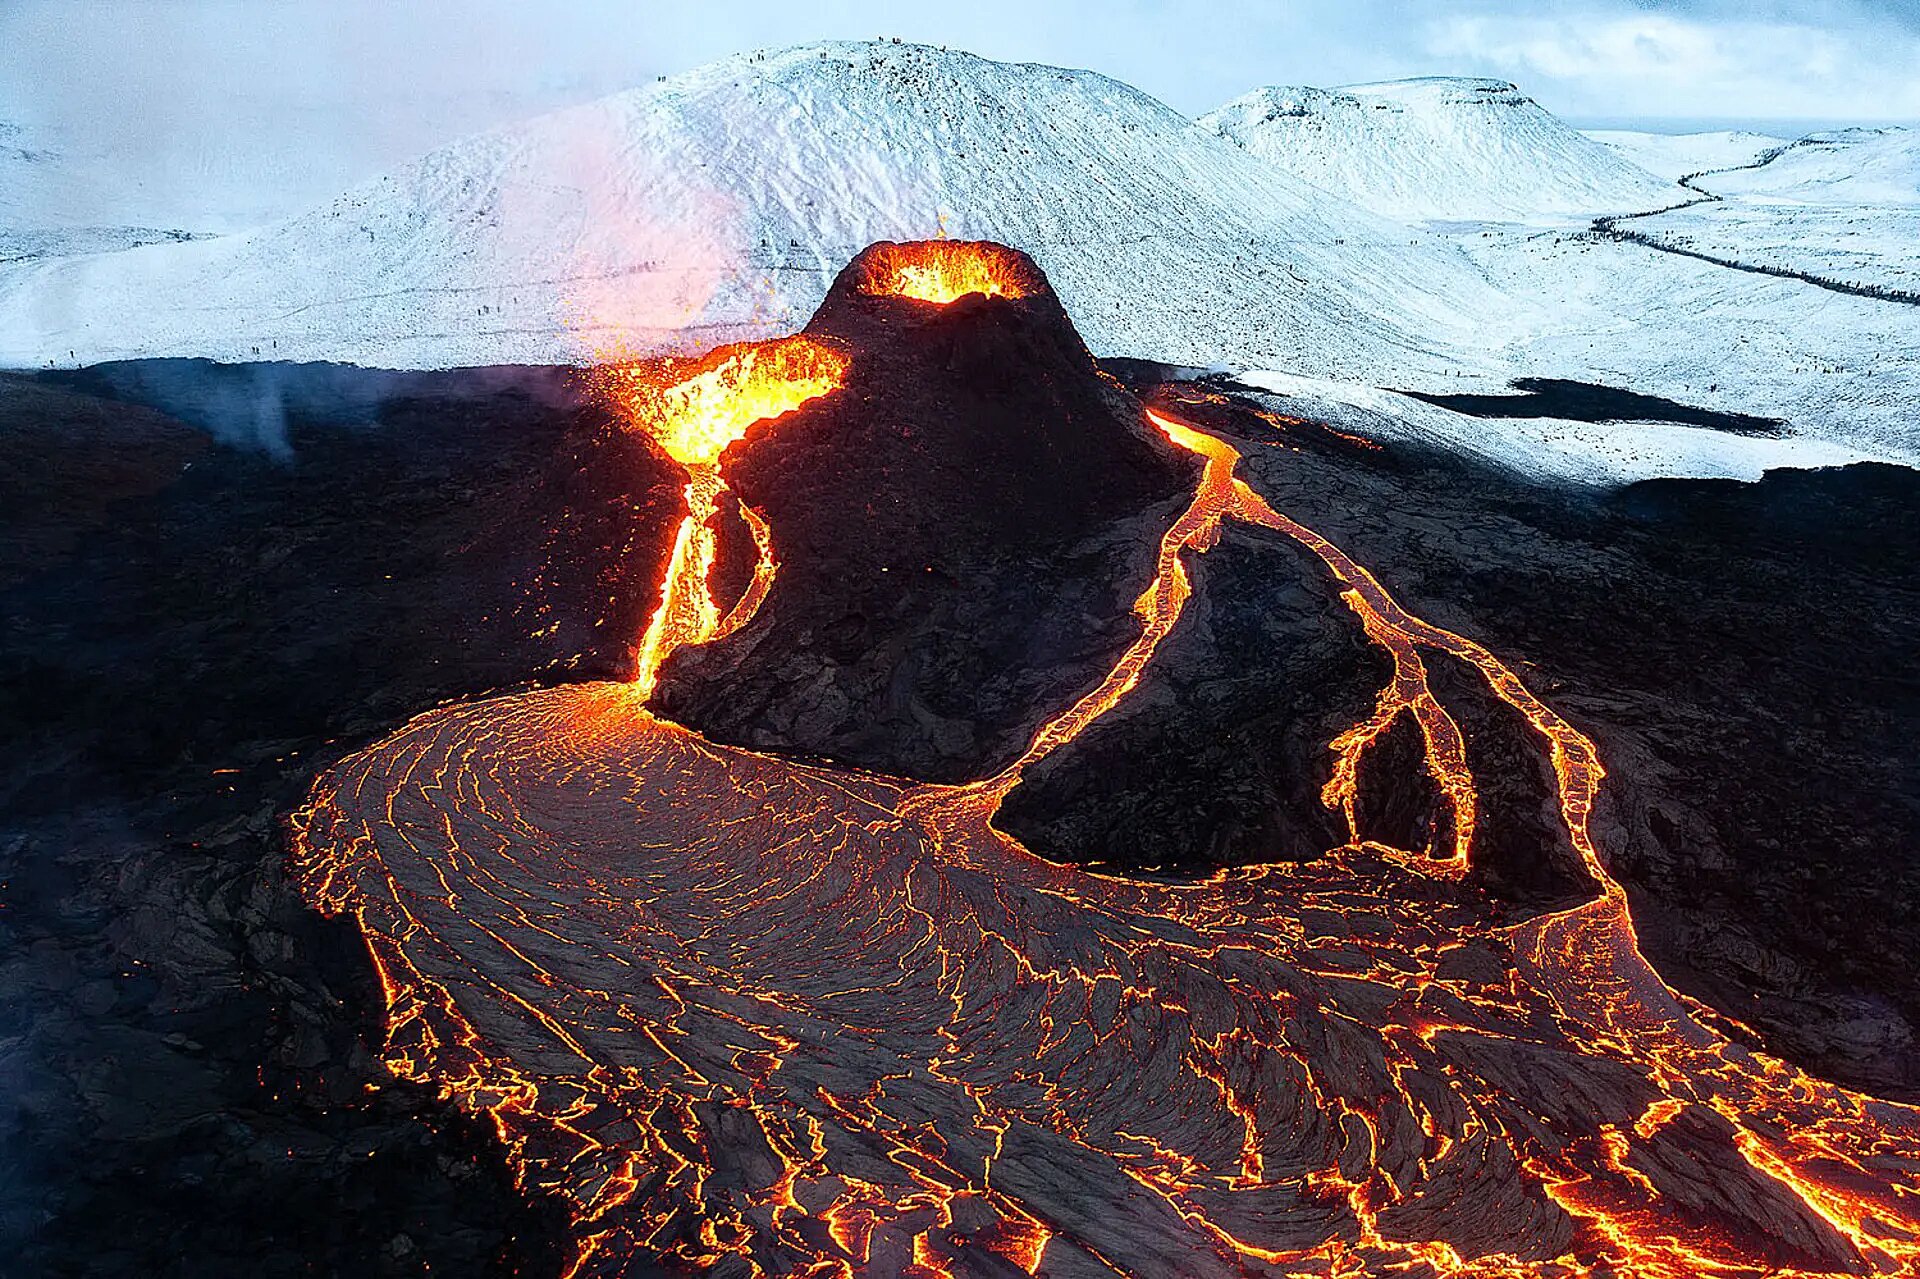 ‘Since the morning of its eruption, the airspace around Iceland’s newest volcano has been buzzing with small planes, helicopters and drones. From the air, you can feel the heat rise up and hit you. It’s palpable and creates near-tropical conditions as the warm air contrasts with the cold wet air off the ocean.’ Chris Burkard is an explorer, photographer, speaker and author.